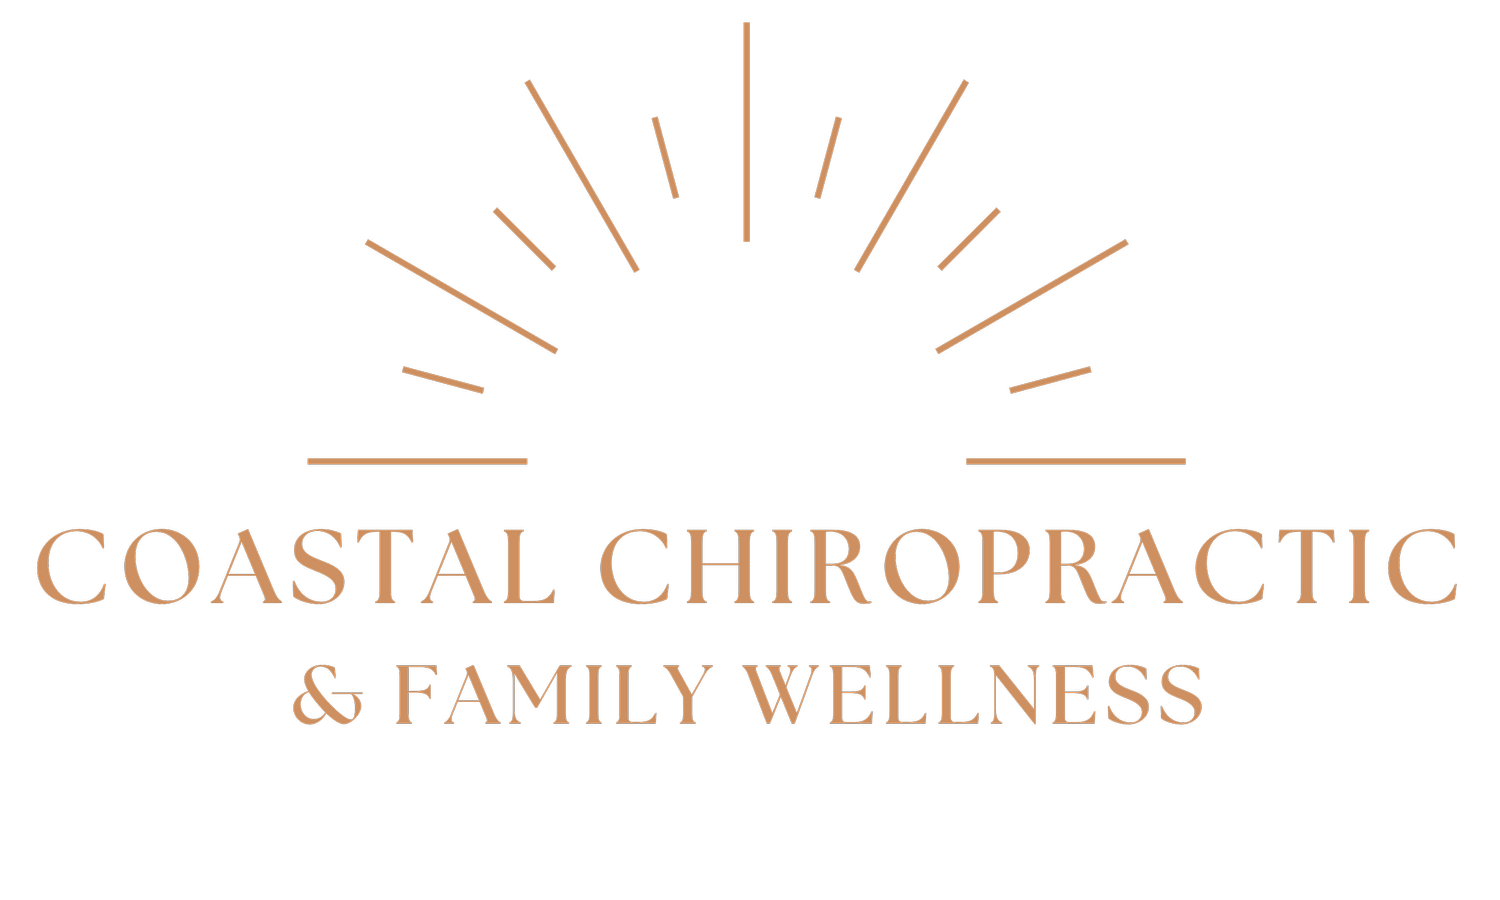 Coastal Chiropractic and Family Wellness